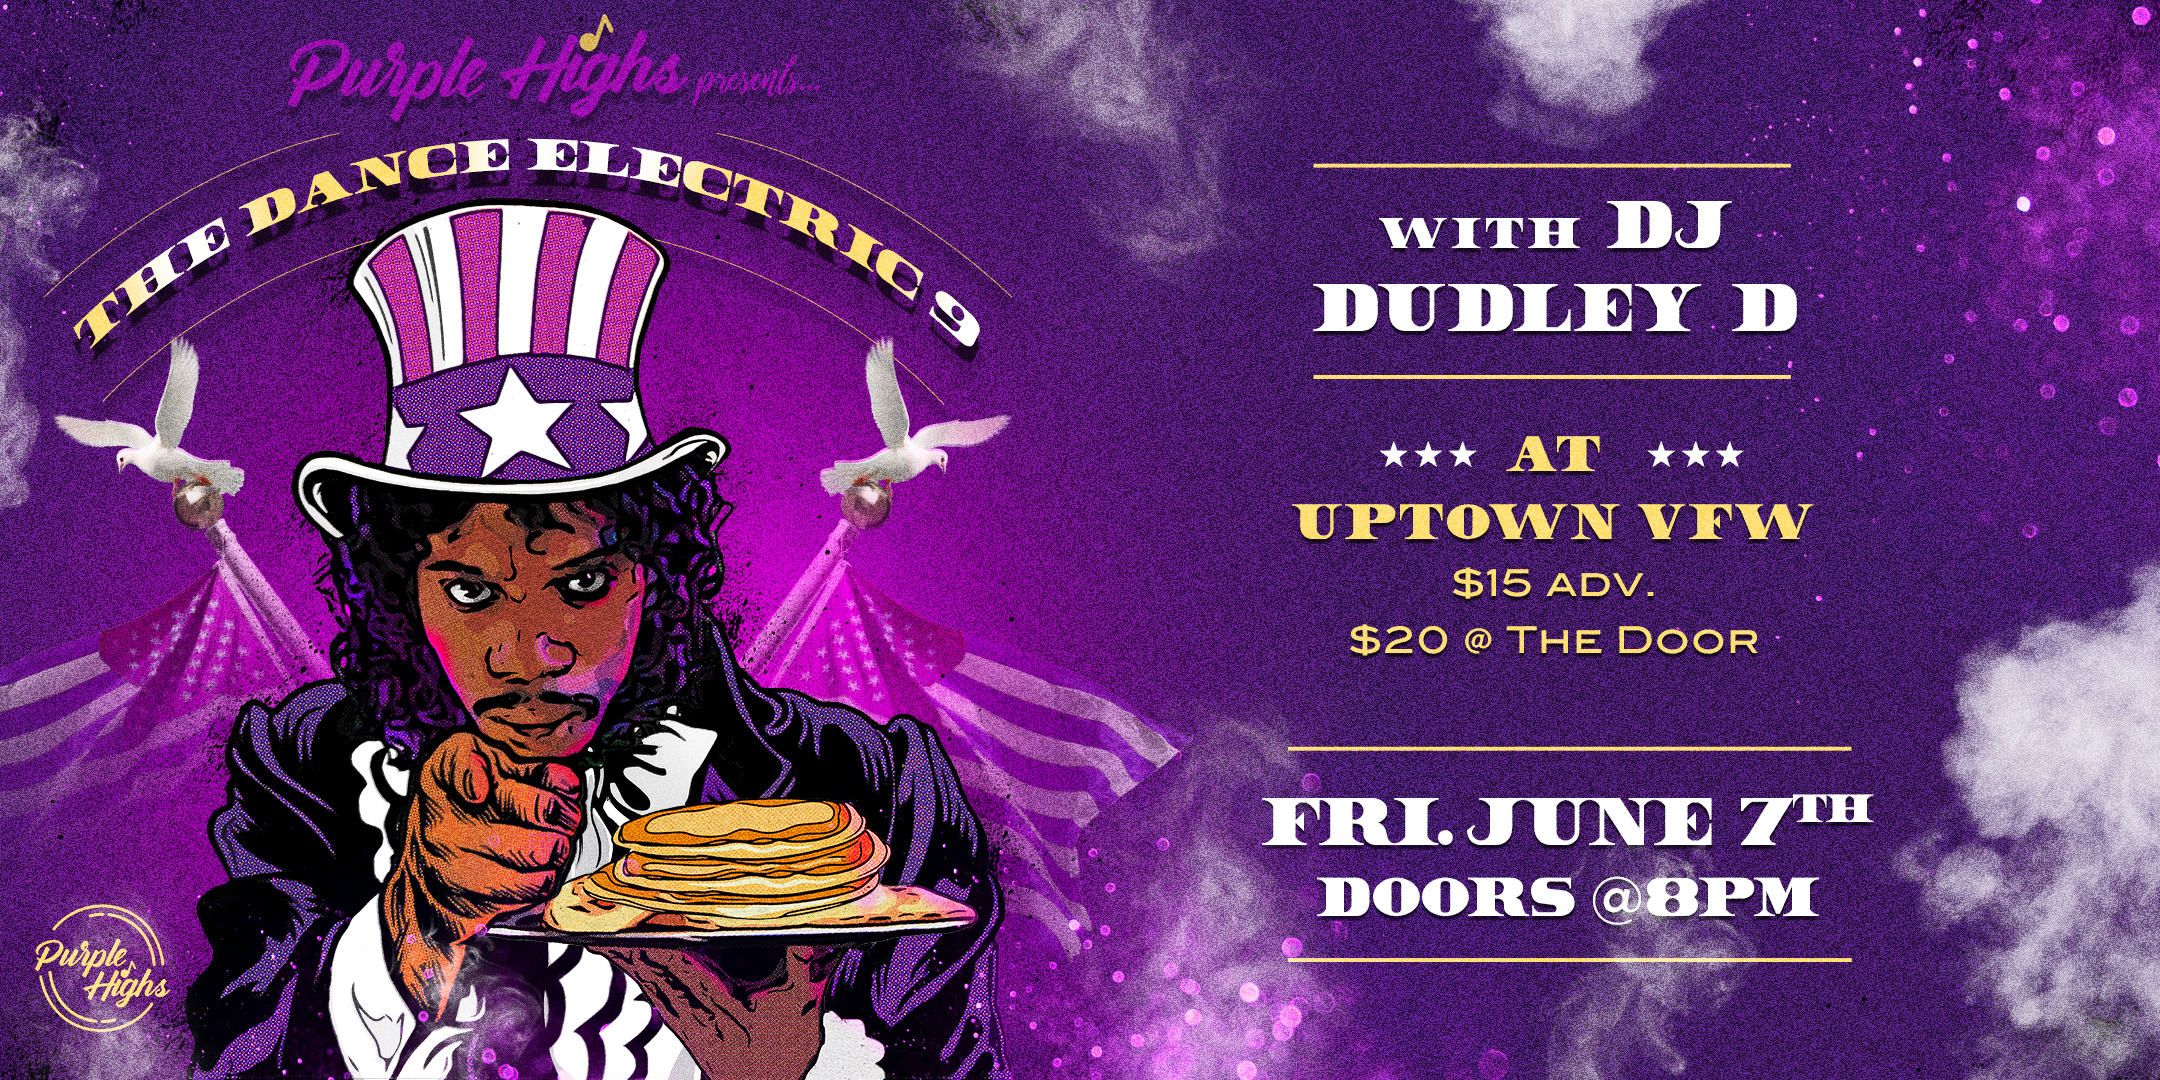 Purple Highs presents The Dance Electric 9 with DJ Dudley D Friday, June 7 James Ballentine "Uptown" VFW Post 246 Doors 8:00pm :: Music 8:00pm :: 21+ GA $15 ADV / $20 DOS NO REFUNDS Ticket On-Sale Now